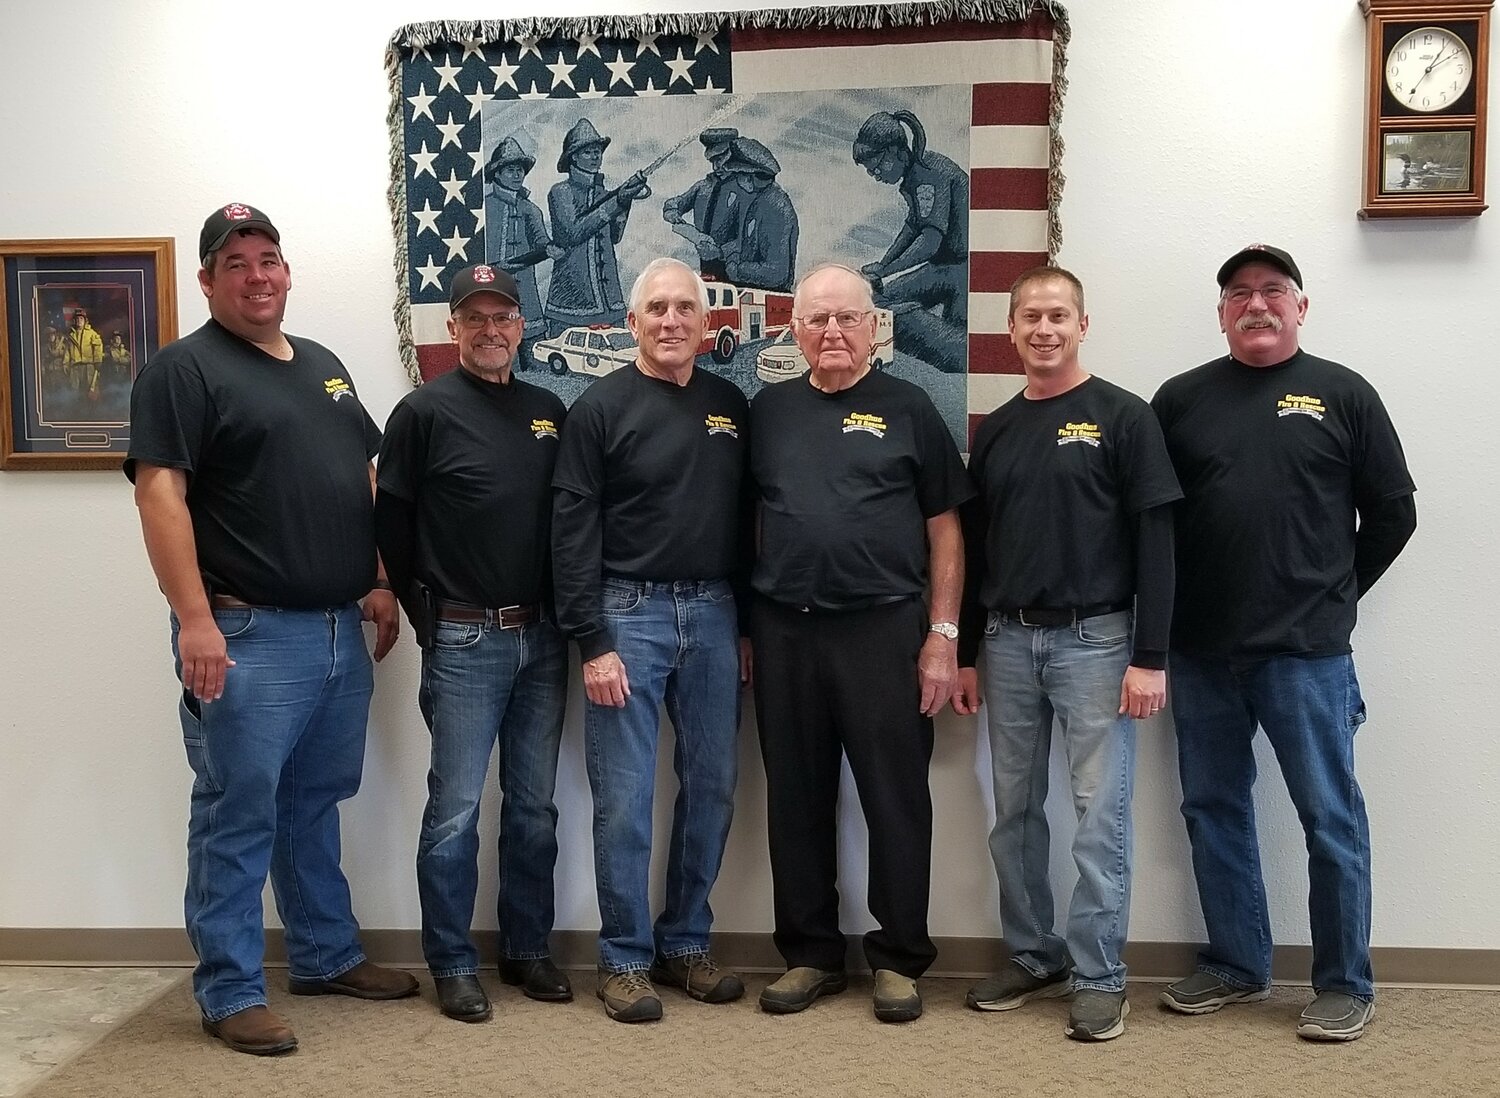 Current Goodhue Fire Department chief, Derek Weckerling stands with former chiefs, Chip Krueger, Al Lodermeier, Elroy Rusch, Dustin Luhman and Mike Lodermeier at the fire hall on October 15, 2023 in observance of the 125th anniversary of the department's founding.